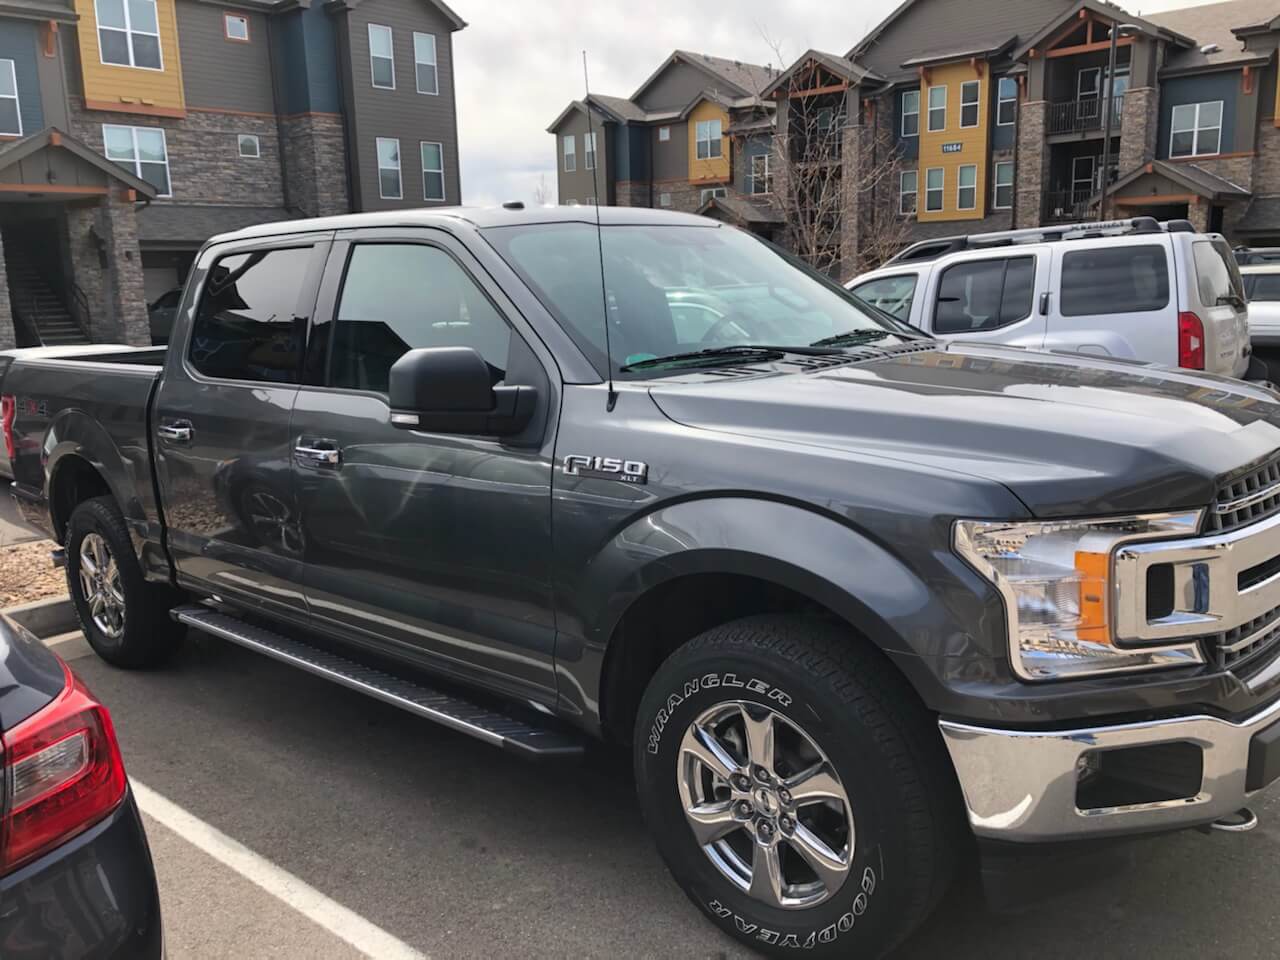 Our new Ford F-150 EcoBoost